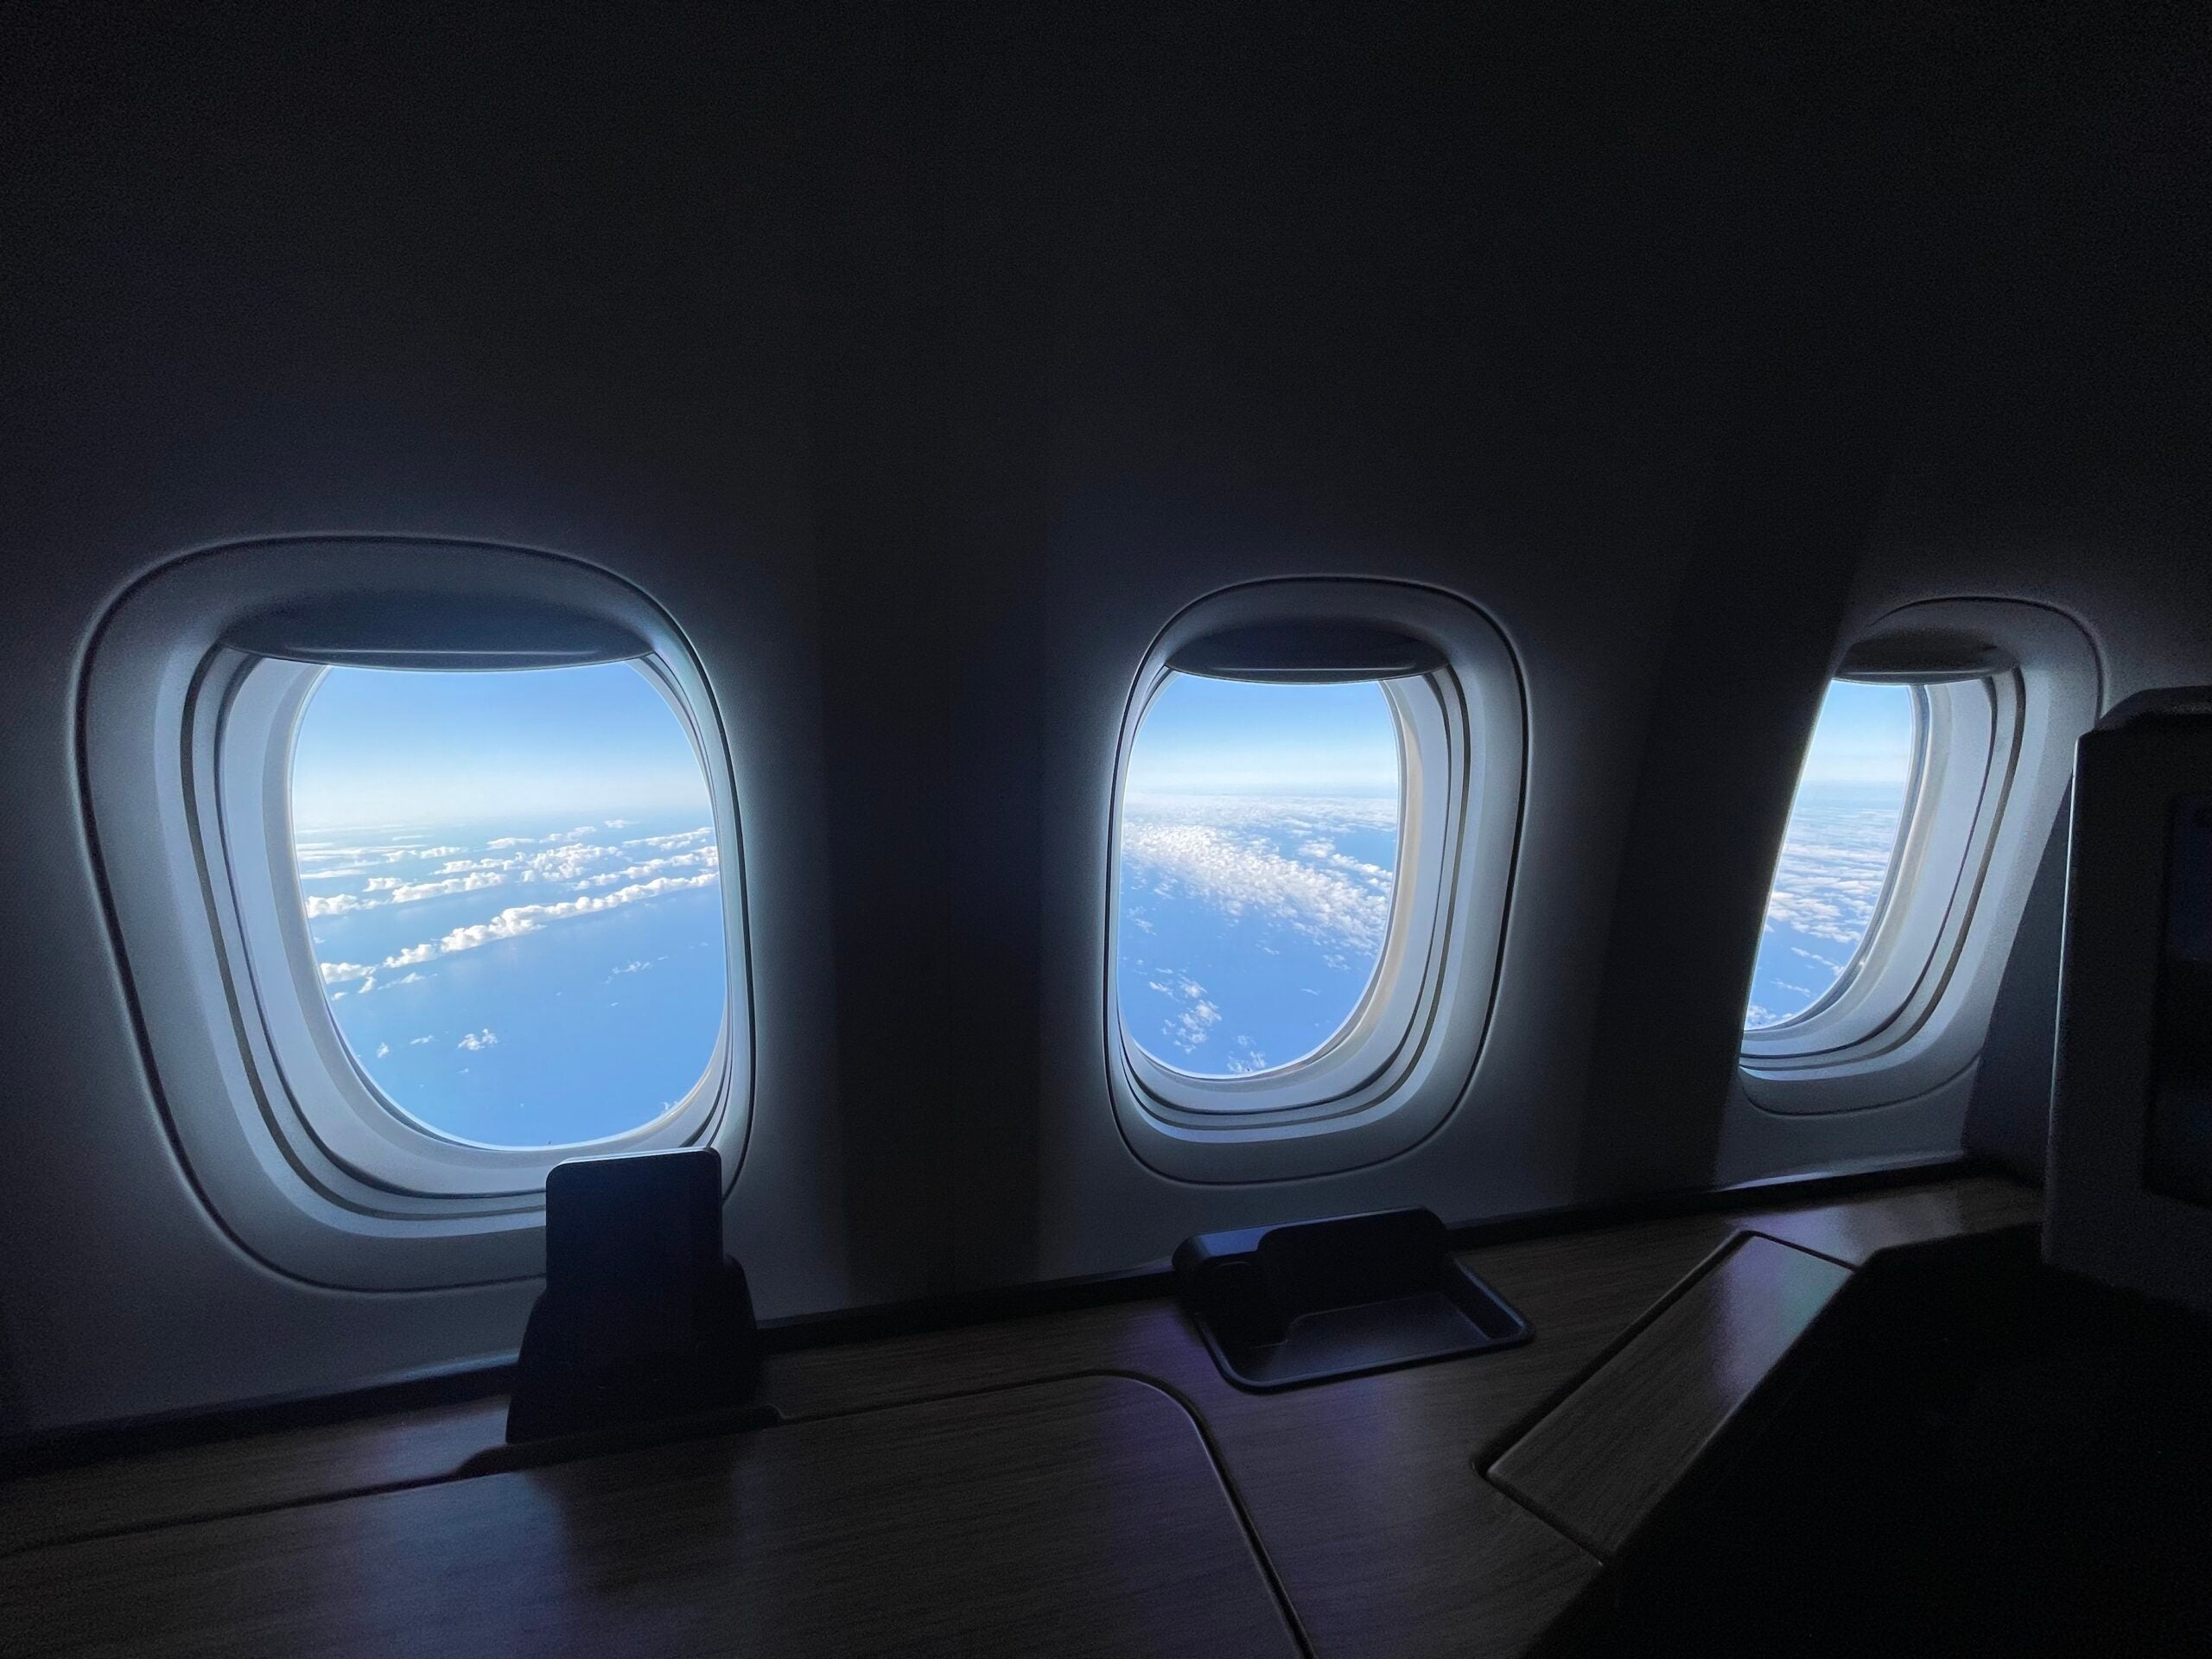 Looking out the window of a plane